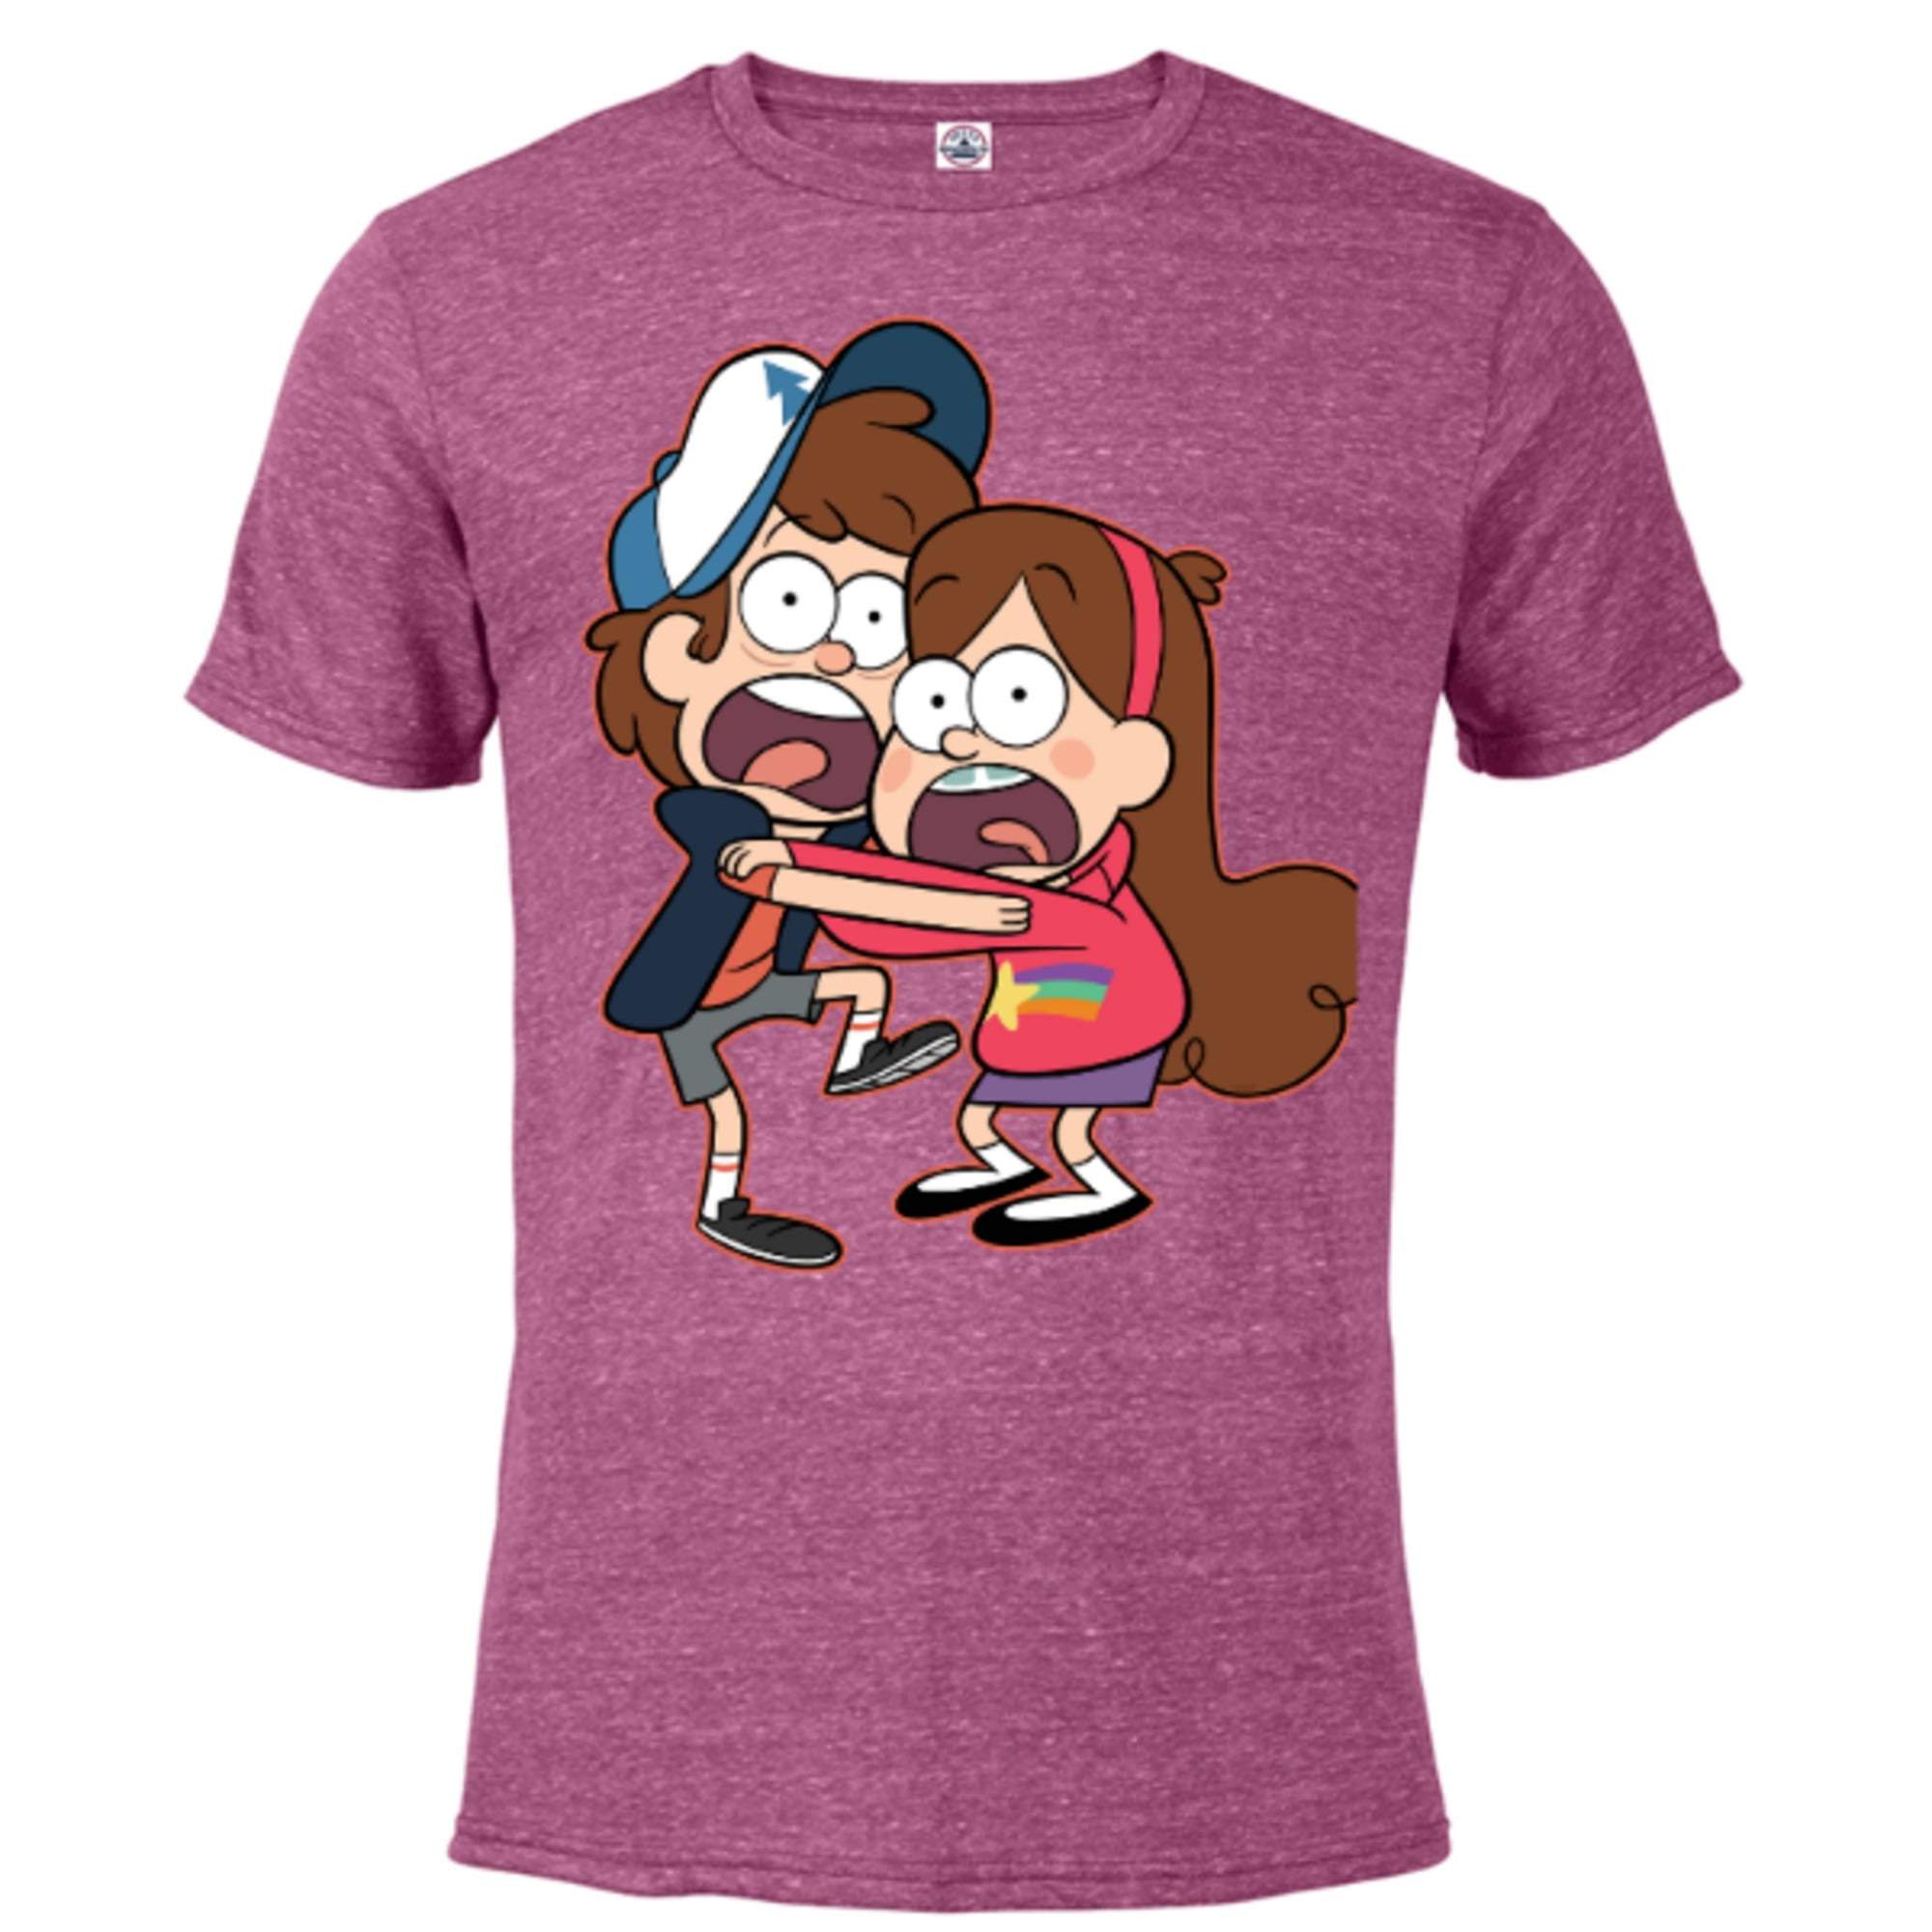 Disney Gravity Falls Dipper and Mabel Pines - Short Sleeve Blended T-Shirt  for Adults - Customized-Berry Snow Heather 